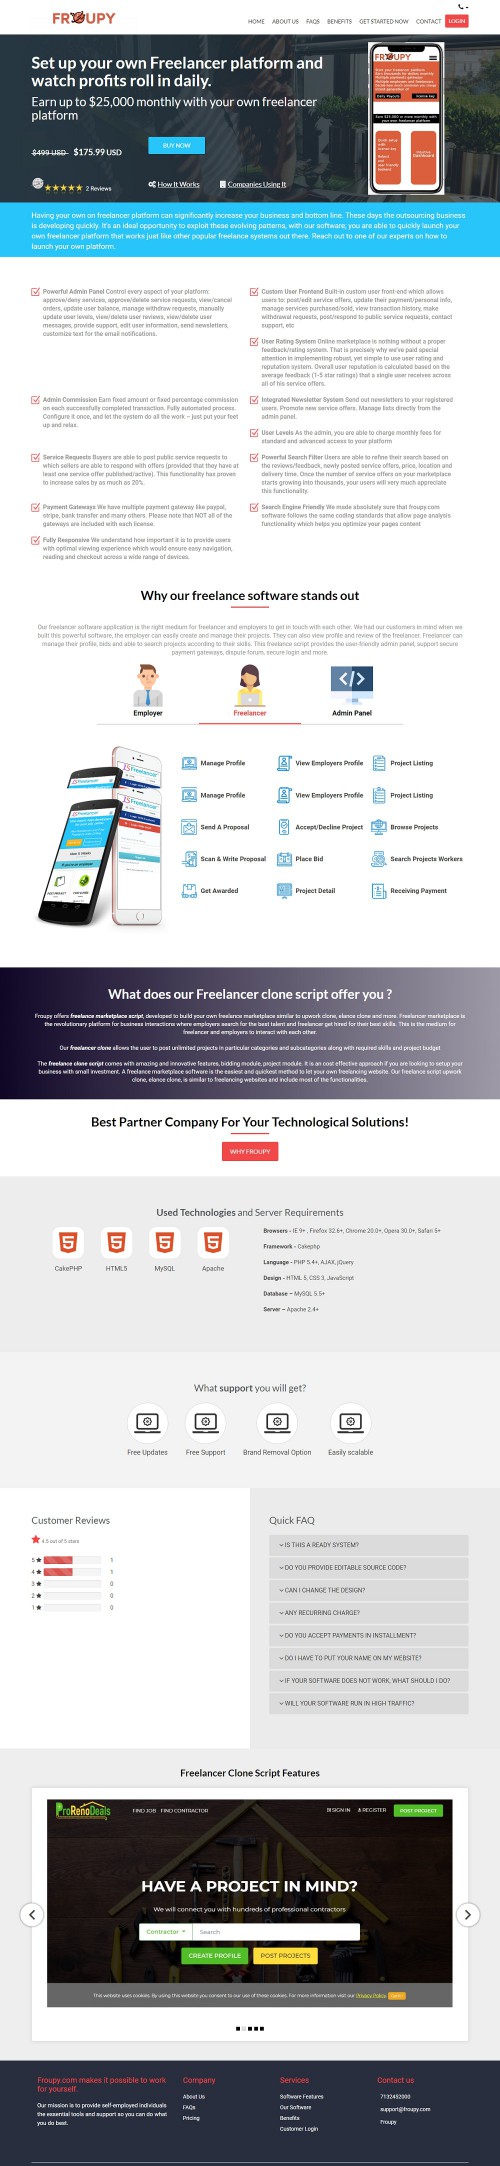 Froupy- Setup your own freelancer platform, freelancer clone, freelancer clone script. fiverr clone script, Best freelancer bidding script and make money as a freelancer.

https://froupy.com/ 

Founded in 2010, Froupy.com is a software development company based in San Antonio, Texas. We employ over 120 dedicated employees all across the world. Our mission is to provide businesses with quality software to create high-quality, scalable software solutions that meet and exceed your company's needs. At Froupy.com, we utilize specialized teams in order to provide our clients with the best service and product. Each team operates like their own SWAT unit - they are highly trained, work together efficiently, and have expert insight into their area of specialization. Through this team structure, we can make sure that the right team is working on the right project. This allows us to effectively execute on ideas and offer the highest quality product to our clients.

#freelancerclone #freelancerclonescript #freelancemarketplacescript #upworkclonescript #fiverrclonescript #freelancerbiddingscript #makemoneyasafreelancer #DevelopaFreelanceMarketplace #SetupyourownFreelancerplatform #ownfreelancerplatform #freelancersoftwareapplication #BestFreelancerclonescript #Bestfreelancemarketplacescript #FreelancerCloneScriptFeatures #selfemployedFreelancer #BestFreelancerSoftware #softwaredevelopmentcompanySanAntonio #UpworkCloneSoftware #ElanceCloneSoftware #freelancerbiddingscriptonline